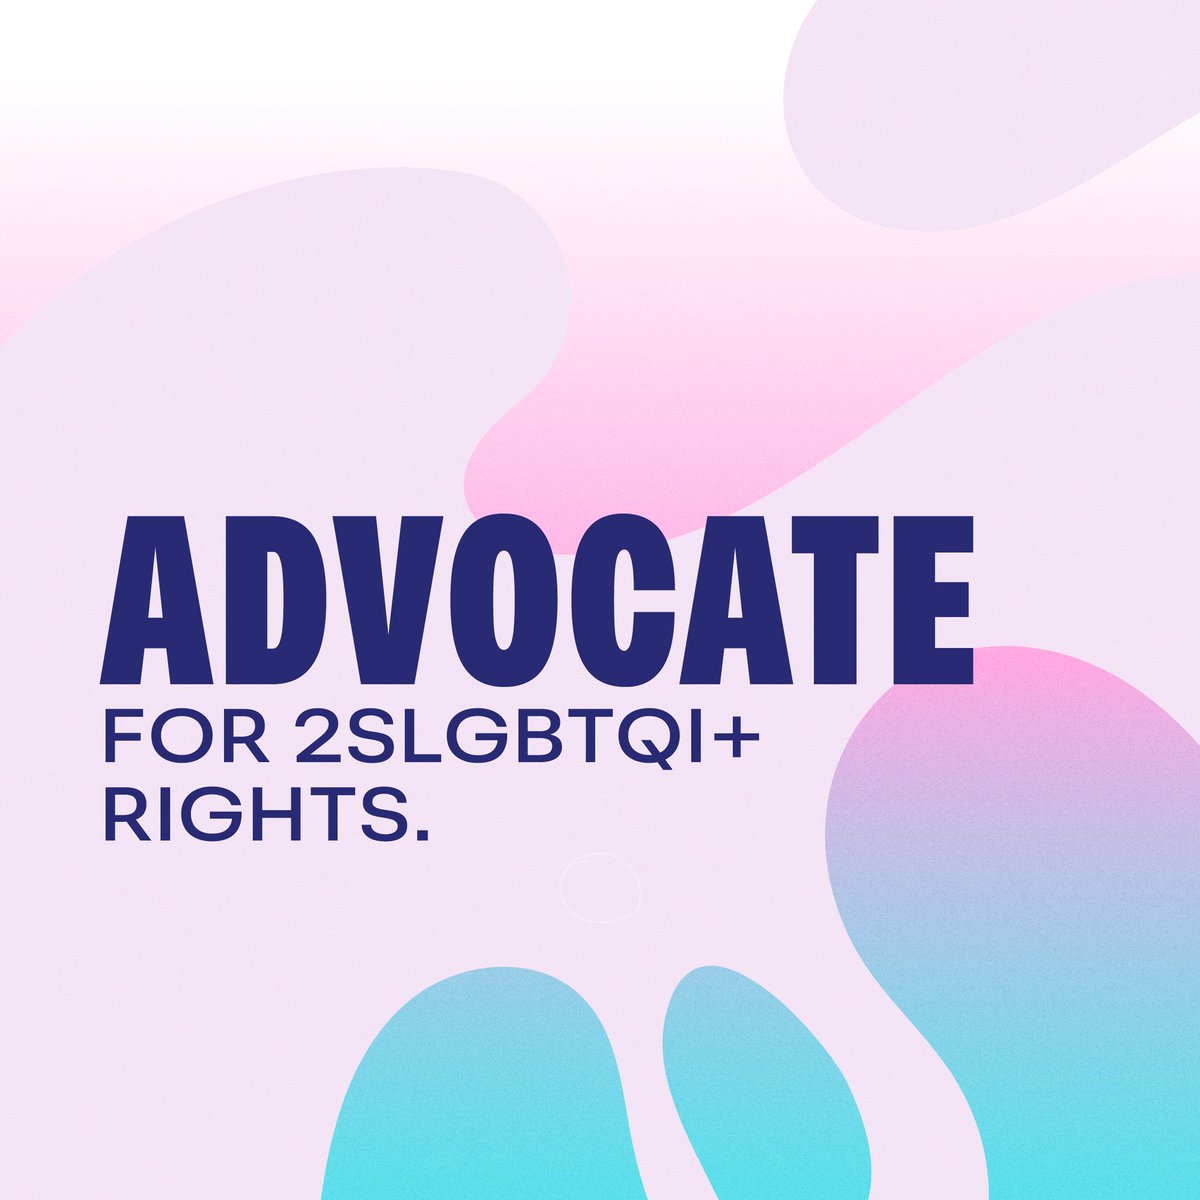 For many 2SLGTBQI+ workers, hate and discrimination are part of daily life. This must stop. CUPW stands with the Canadian labour community in standing against homophobia, transphobia, intersexphobia and biphobia. #IDAHOBIT